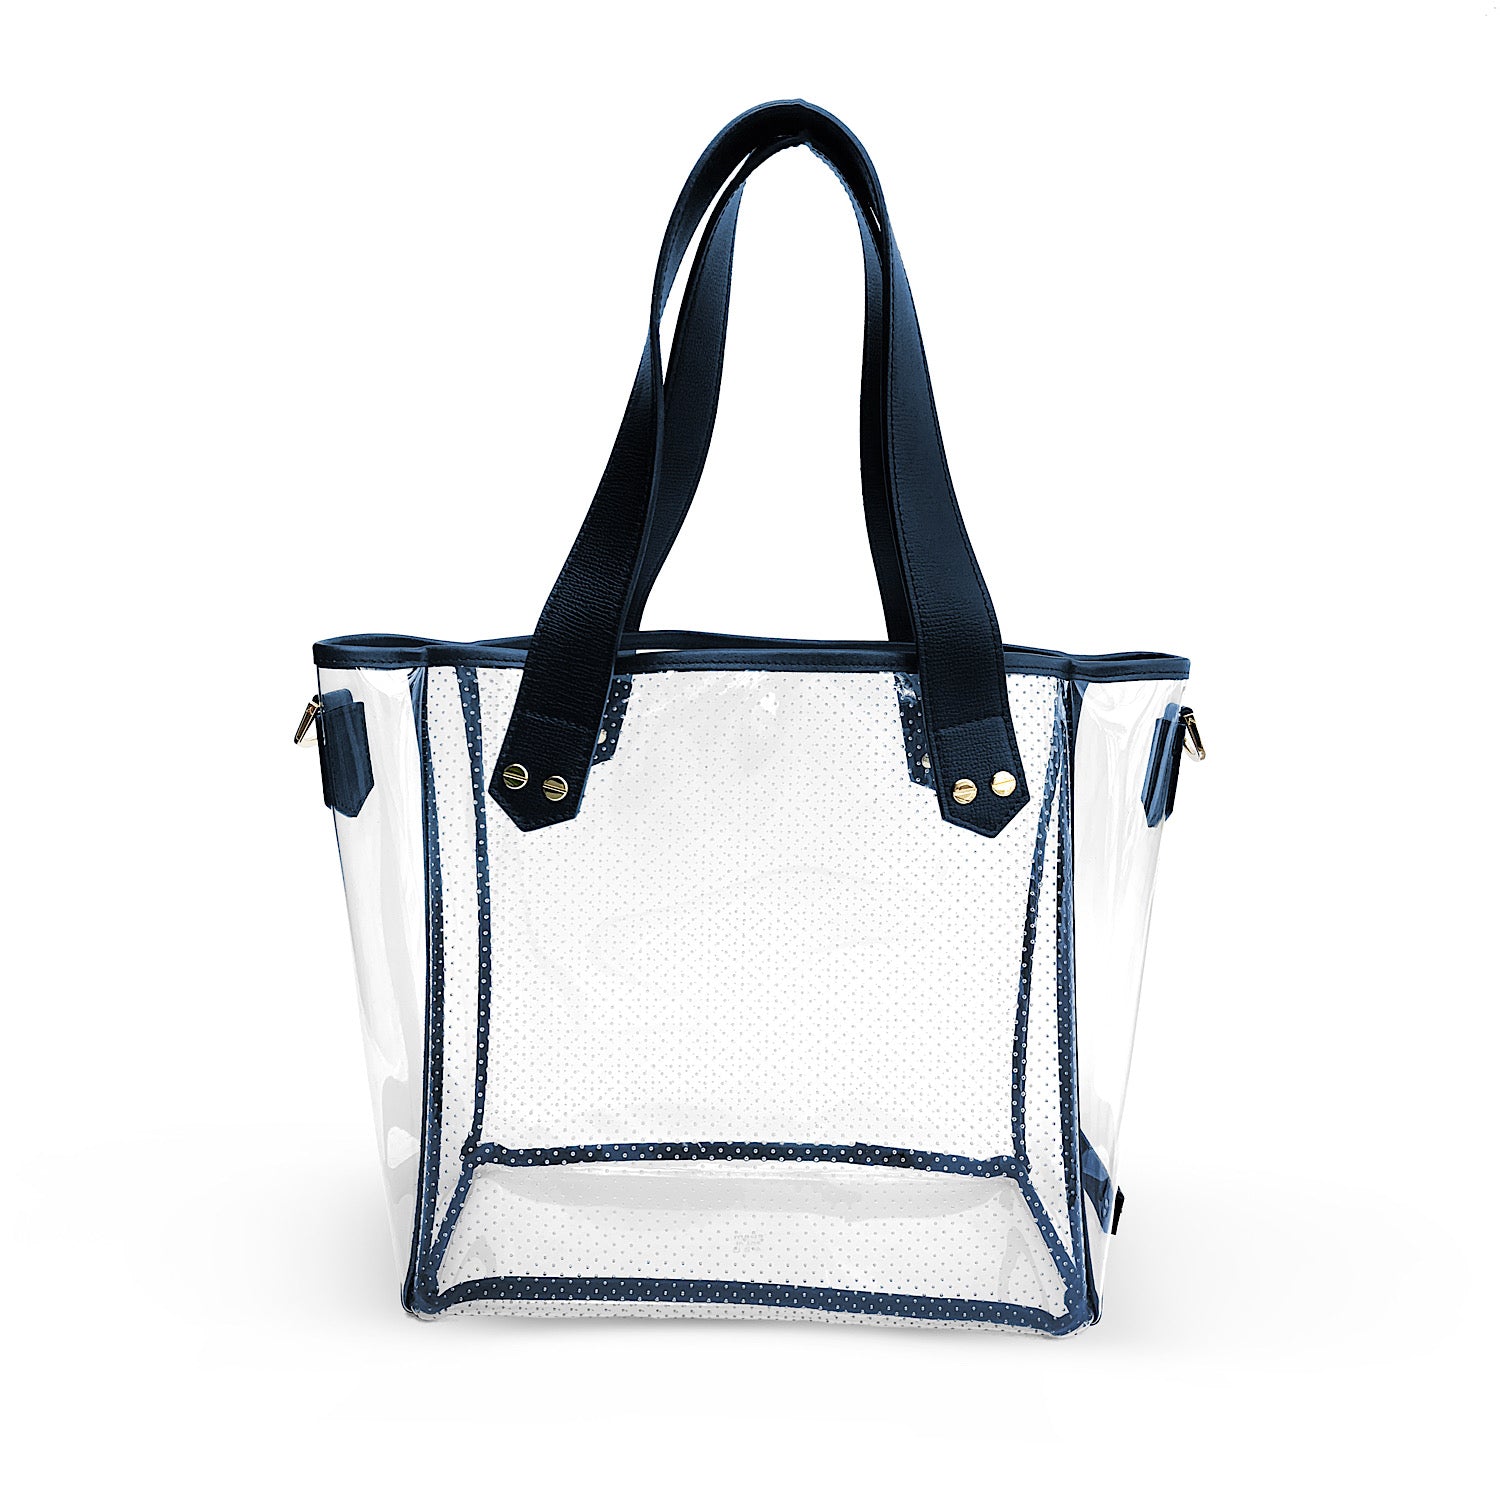 Gameday Bag - Navy Leather / Clear PVC